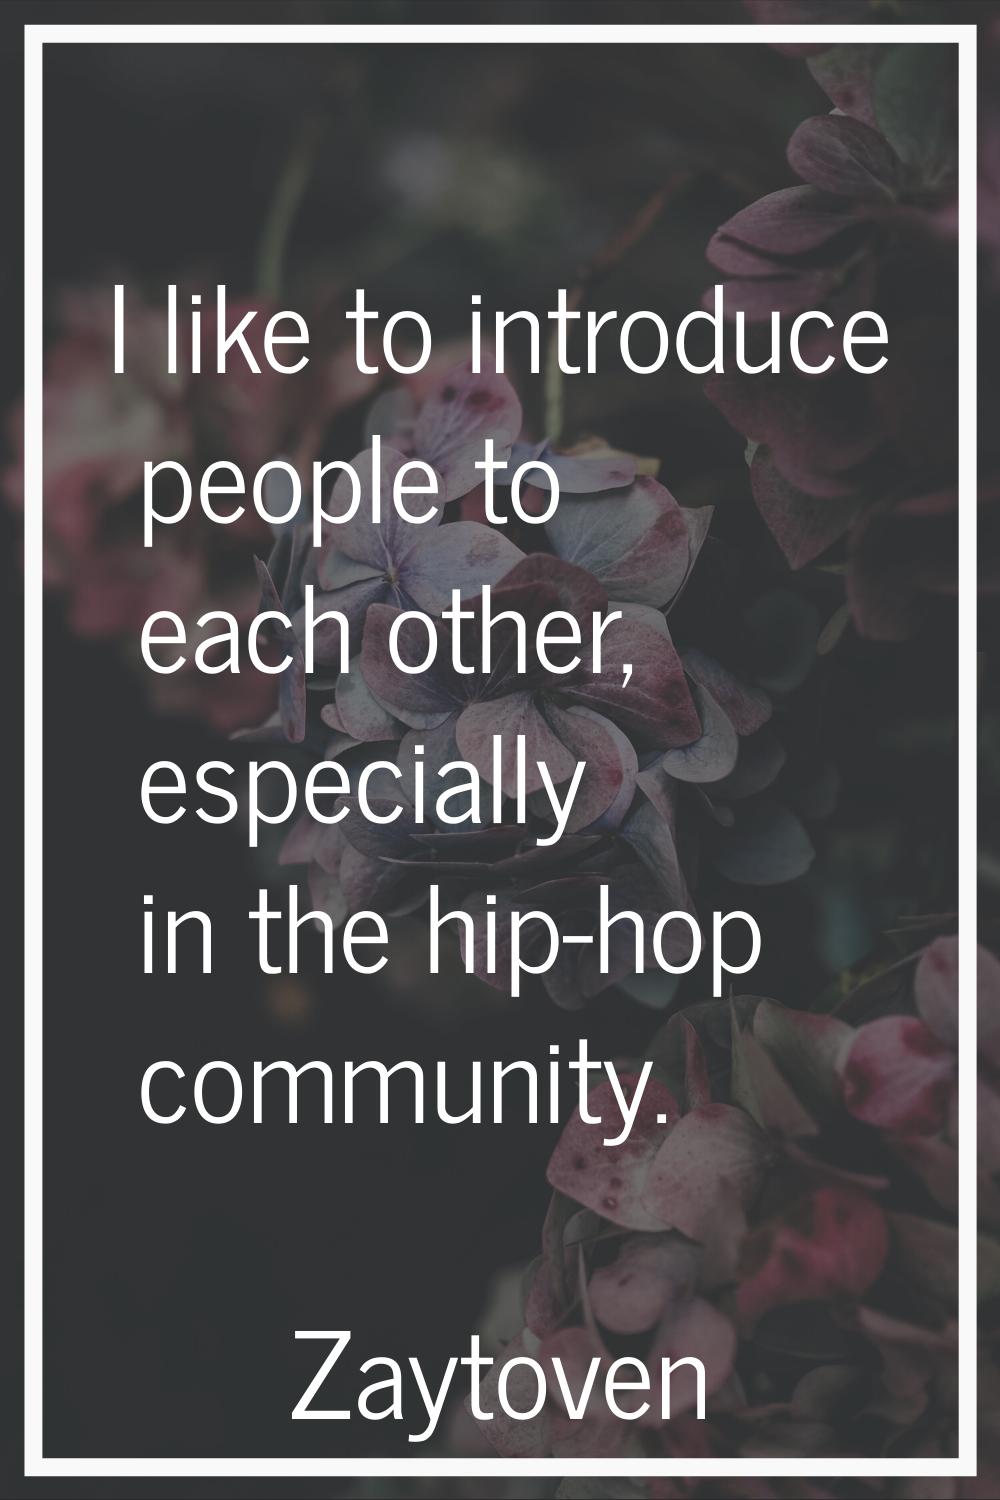 I like to introduce people to each other, especially in the hip-hop community.